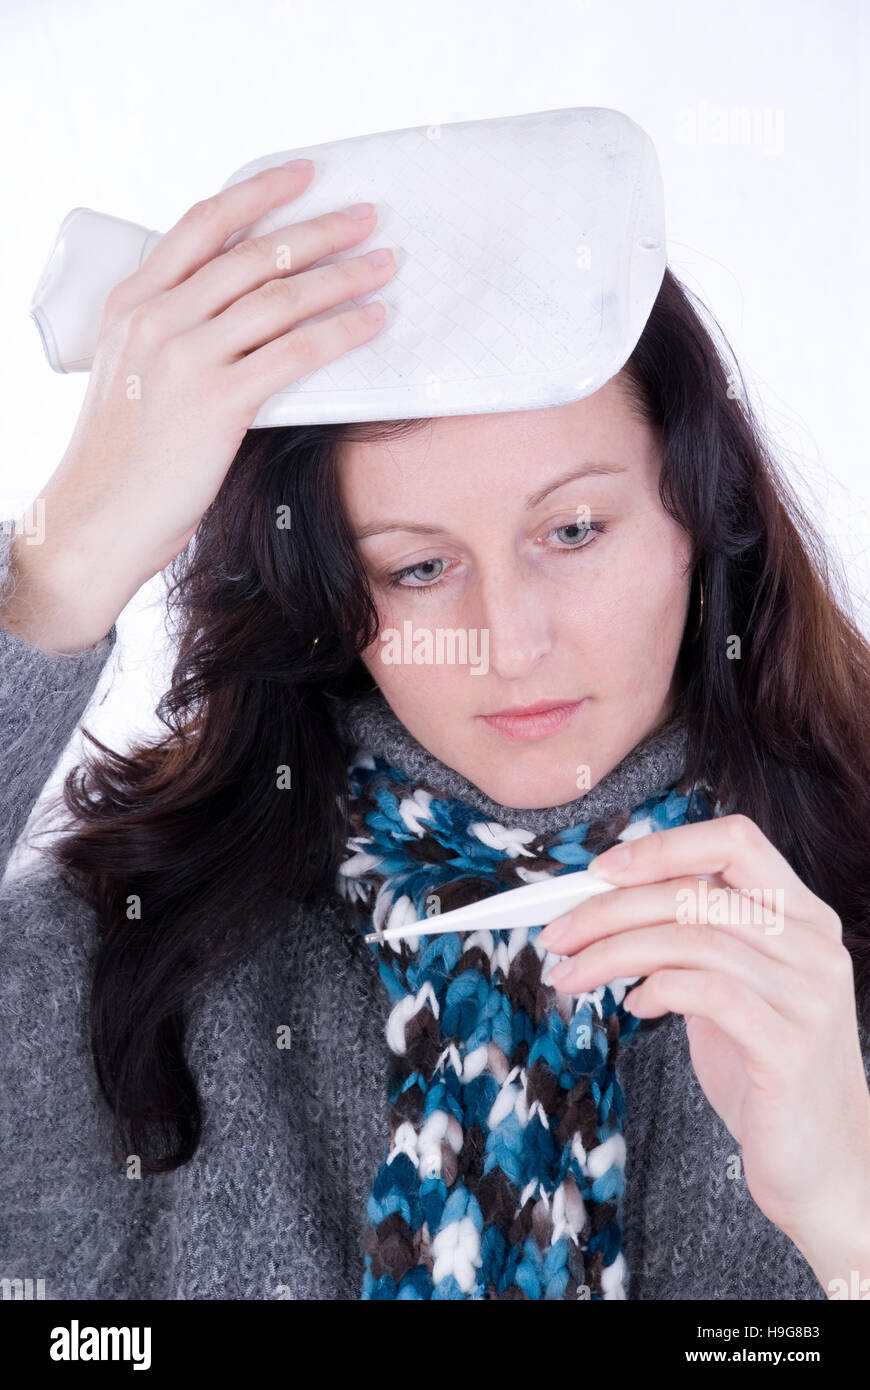 Young woman measuring her temperature Stock Photo